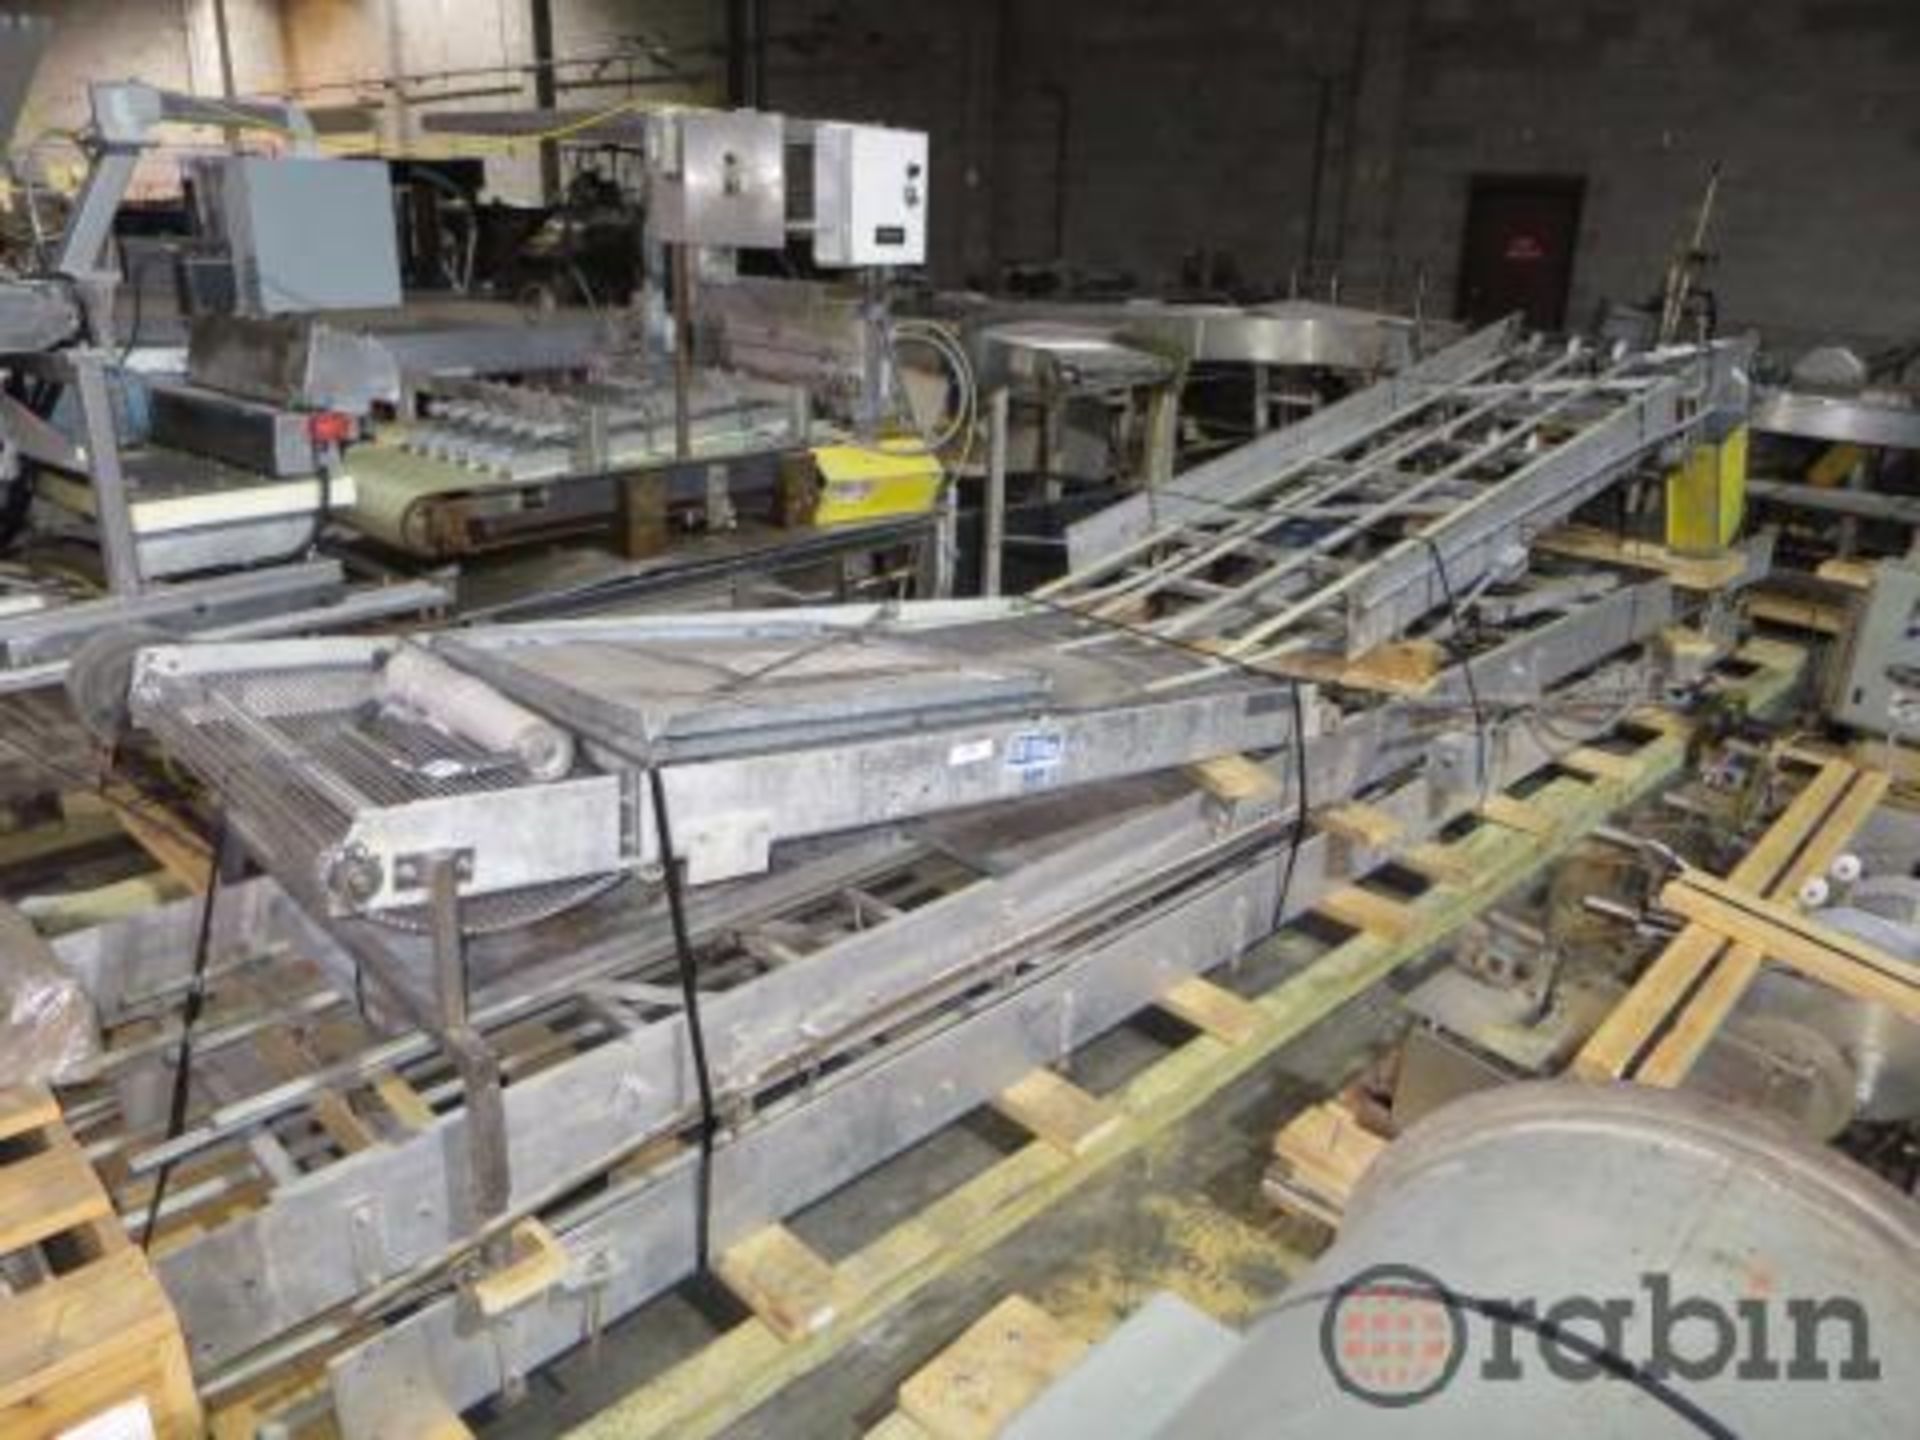 Lot of aluminium framed conveyor including, 24" x 14' section, with 6" x 14' section on one skid,